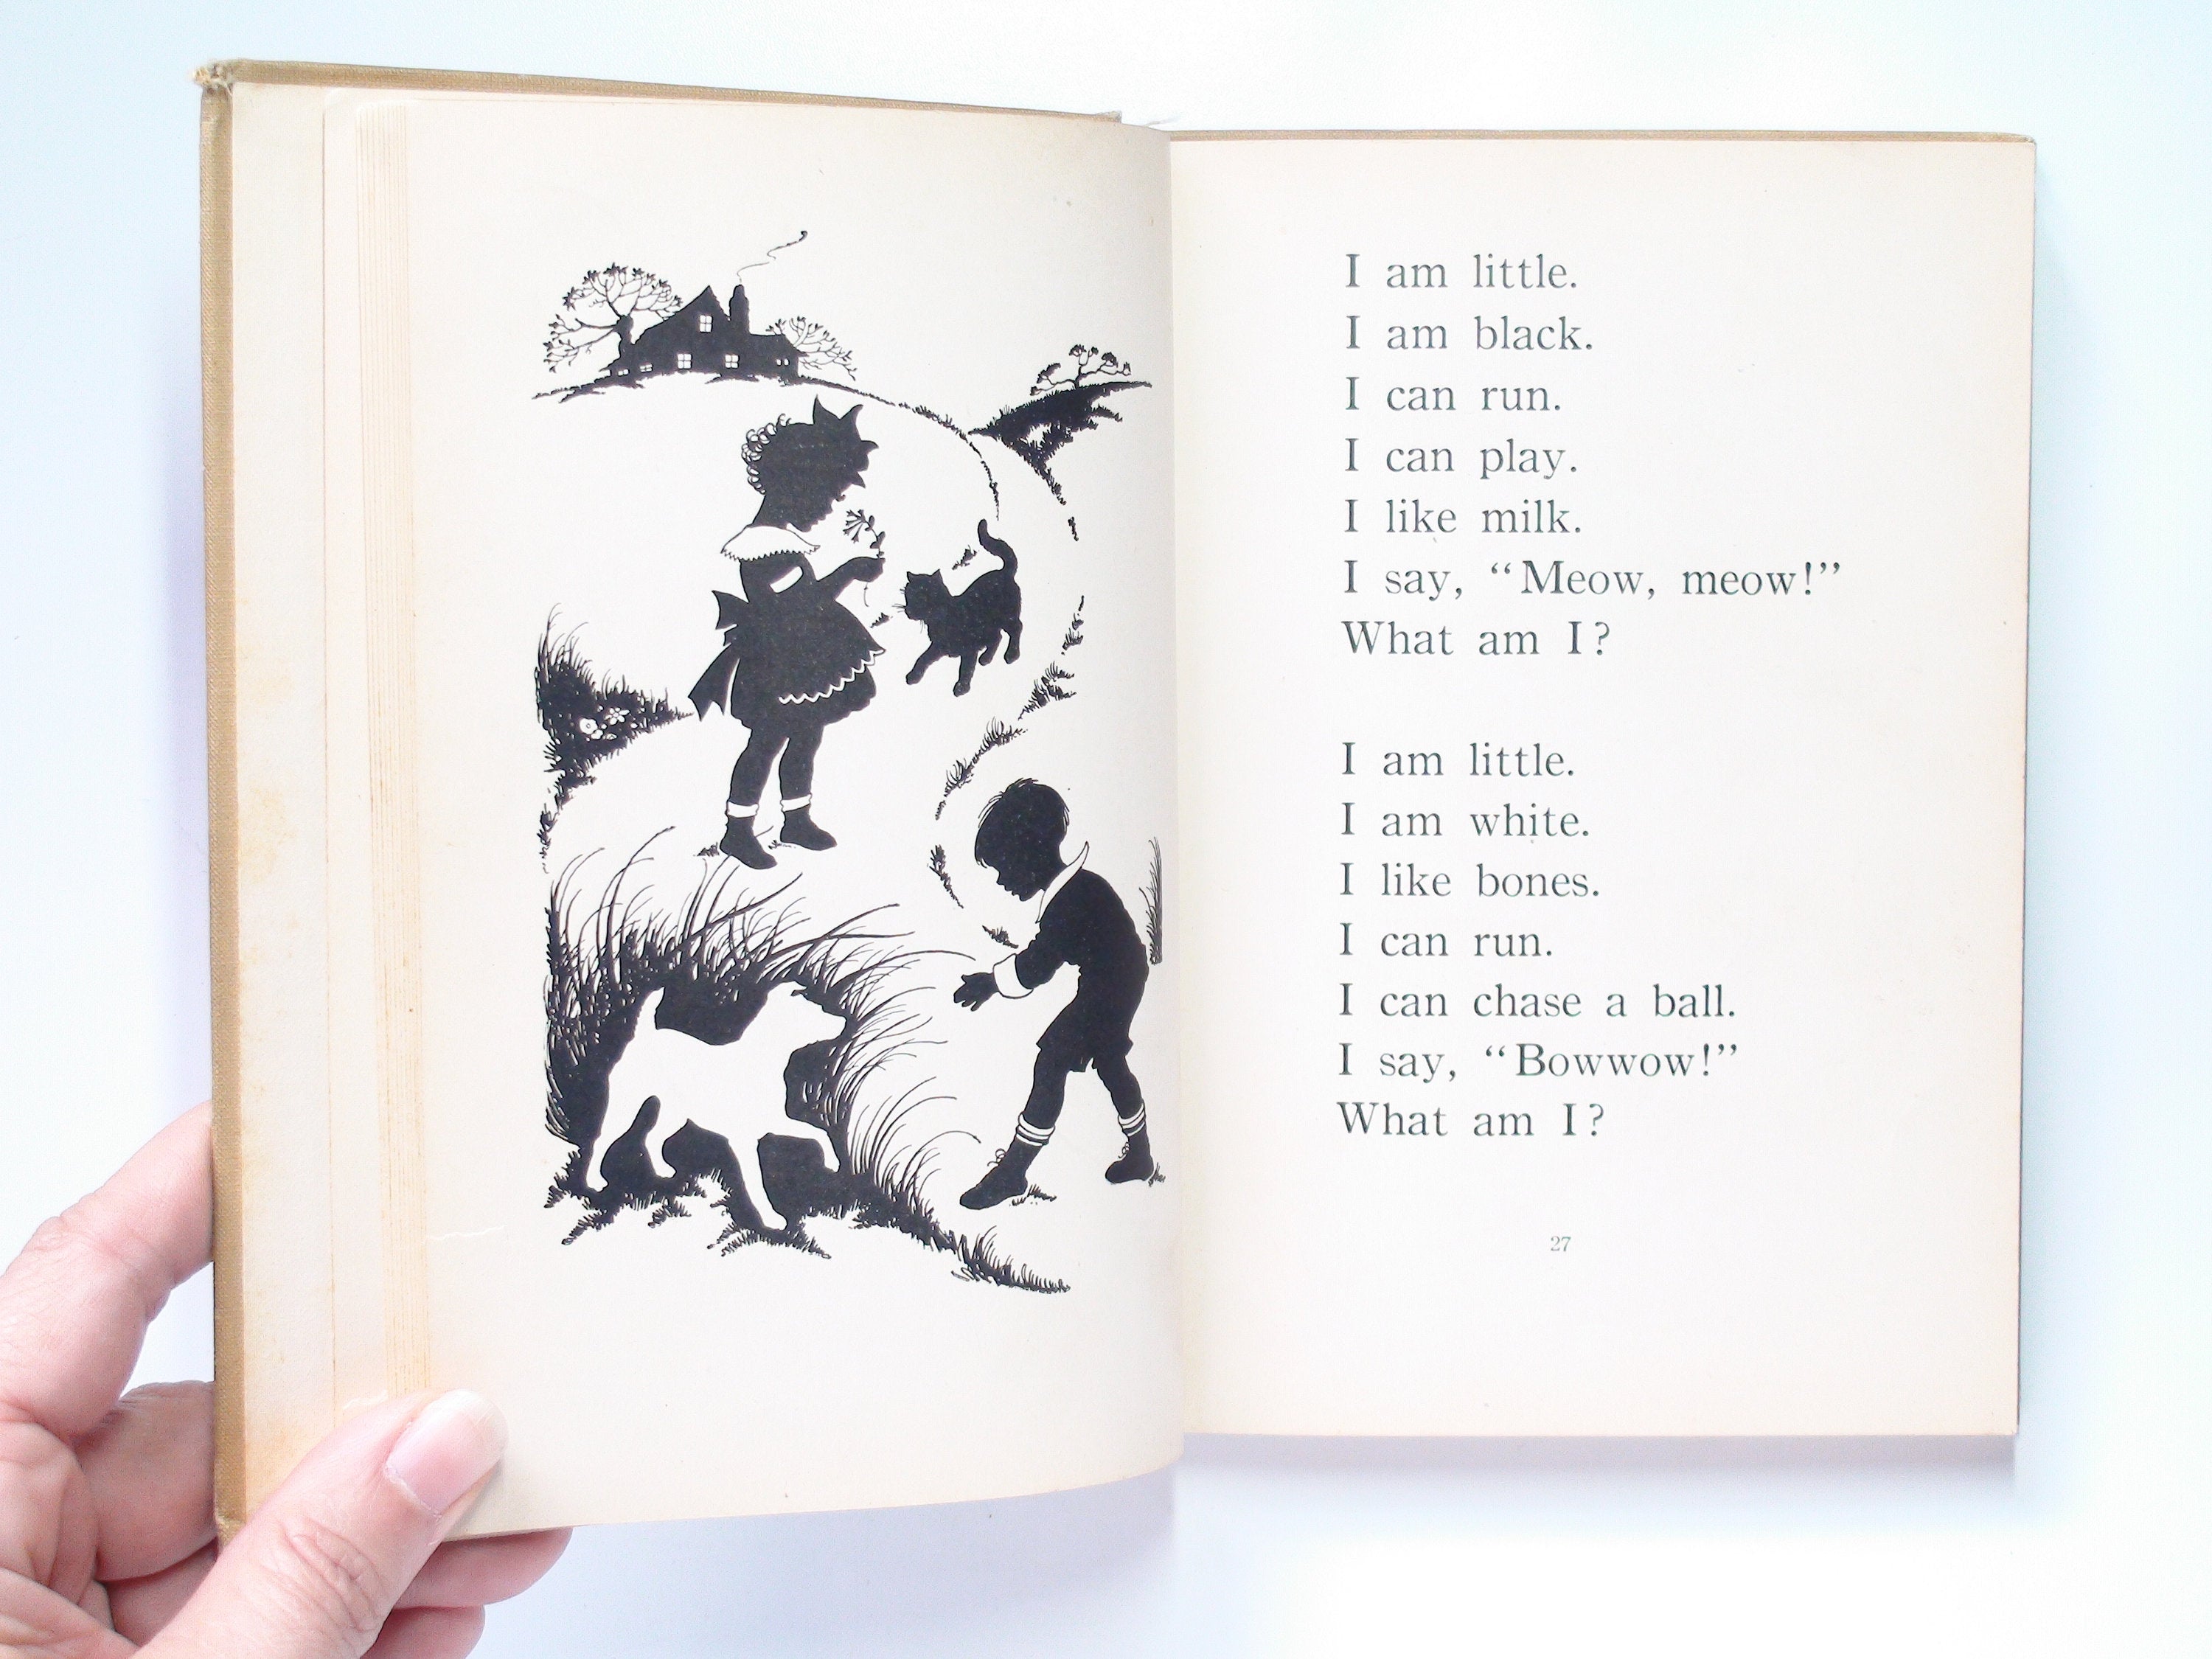 A Riddle Book for Silent Reading by Lily Lee Dootson, Illustrated, 1930